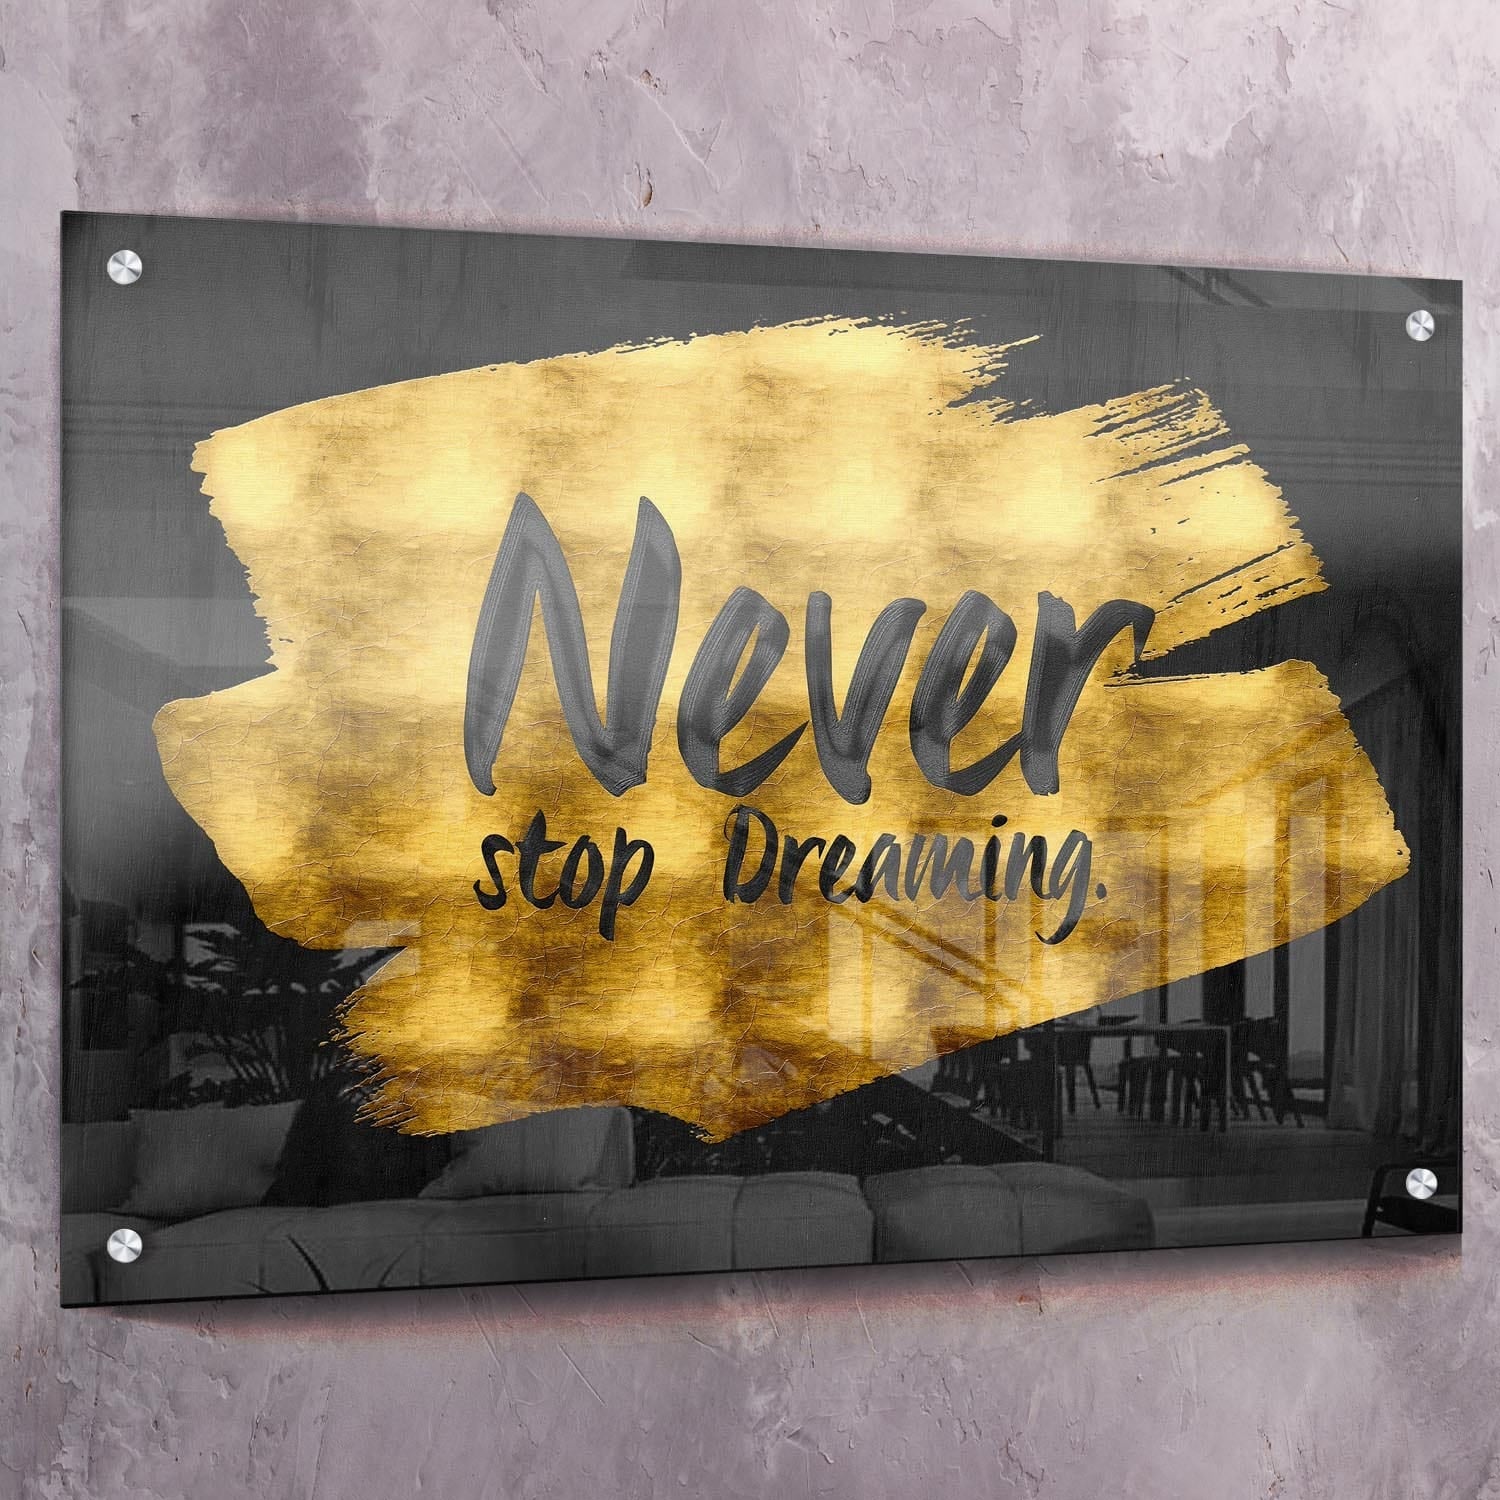 Never Stop Dreaming Wall Art | Inspirational Wall Art Motivational Wall Art Quotes Office Art | ImpaktMaker Exclusive Canvas Art Landscape